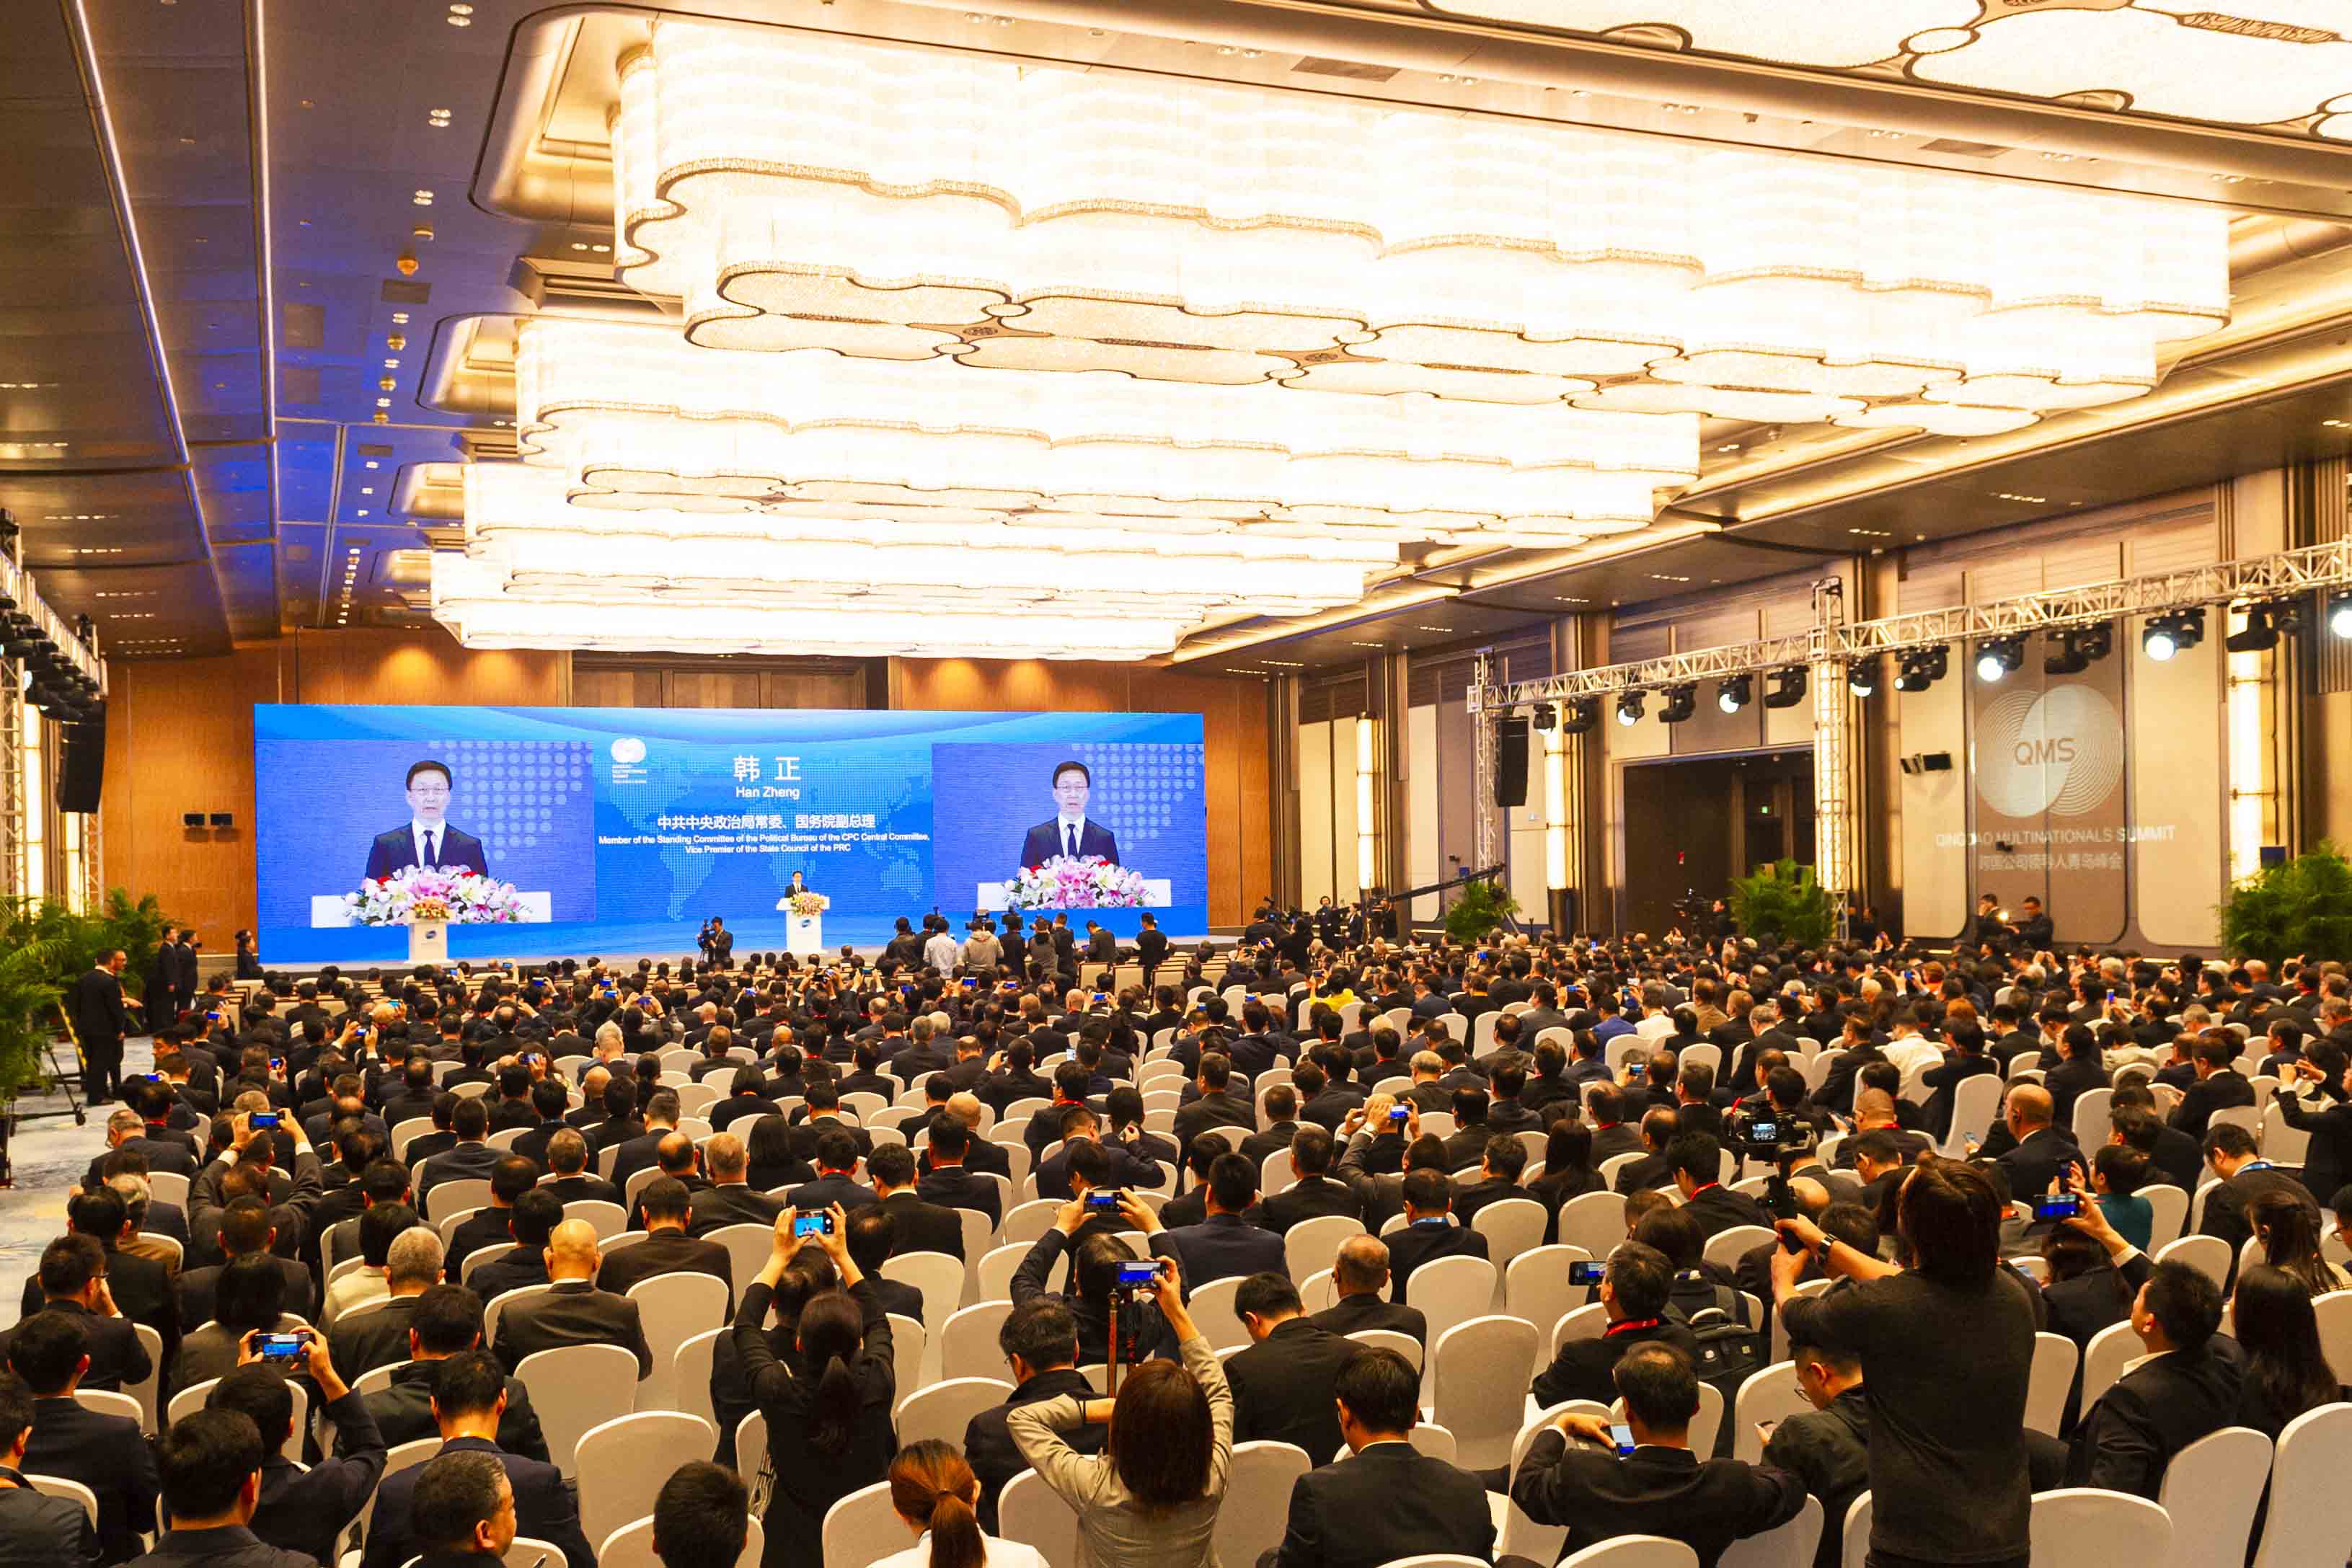 The Opening Ceremony of the First Qingdao Multinationals Summit